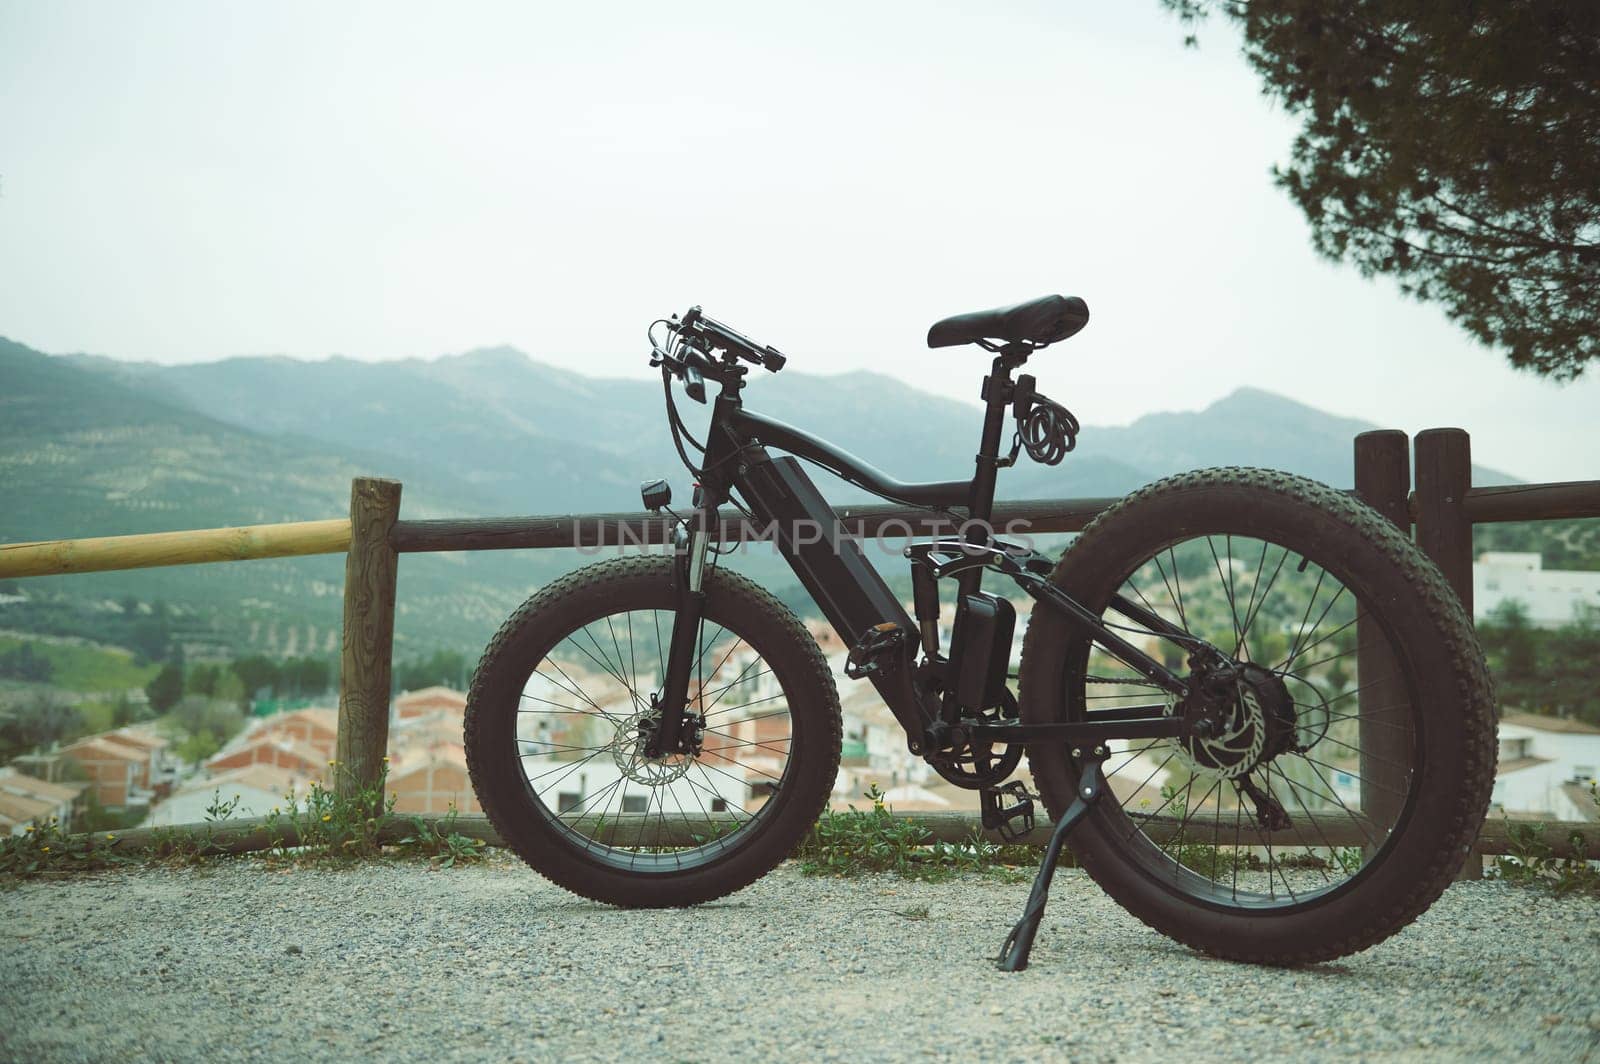 A modern black electric bike on the countryside road, parked by a wooden fence, against mountains background in the nature. Copy advertising space. Environmental conservation. Sustainable lifestyle